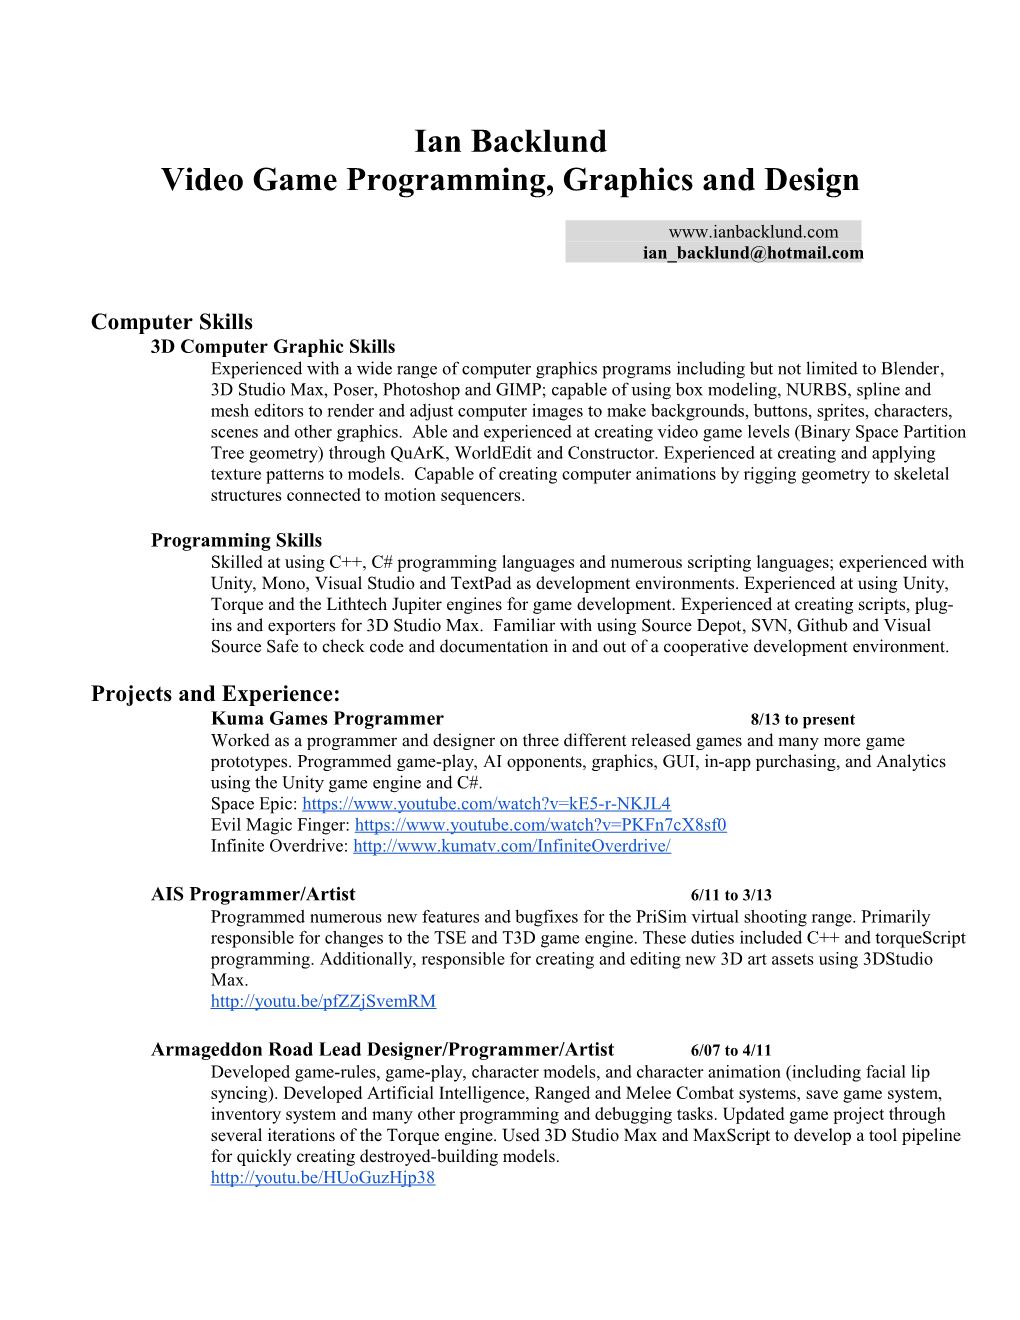 Video Game Programming, Graphics and Design